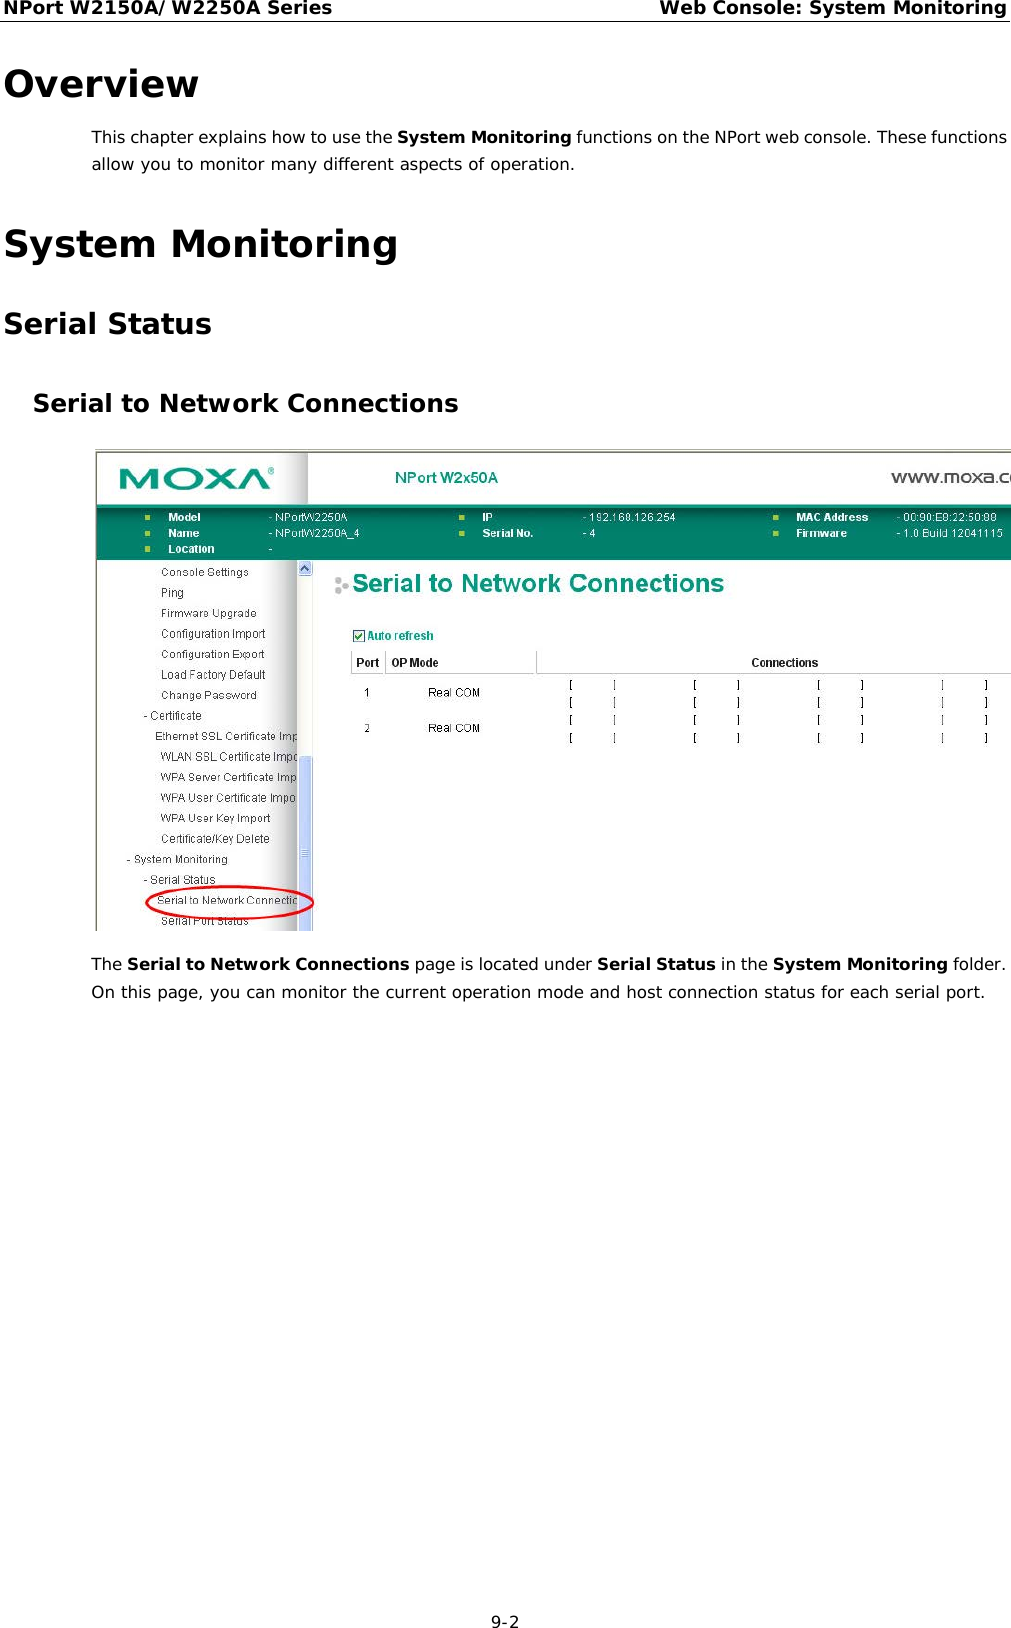 NPort W2150A/W2250A Series Web Console: System Monitoring  9-2 Overview This chapter explains how to use the System Monitoring functions on the NPort web console. These functions allow you to monitor many different aspects of operation. System Monitoring Serial Status Serial to Network Connections  The Serial to Network Connections page is located under Serial Status in the System Monitoring folder. On this page, you can monitor the current operation mode and host connection status for each serial port. 